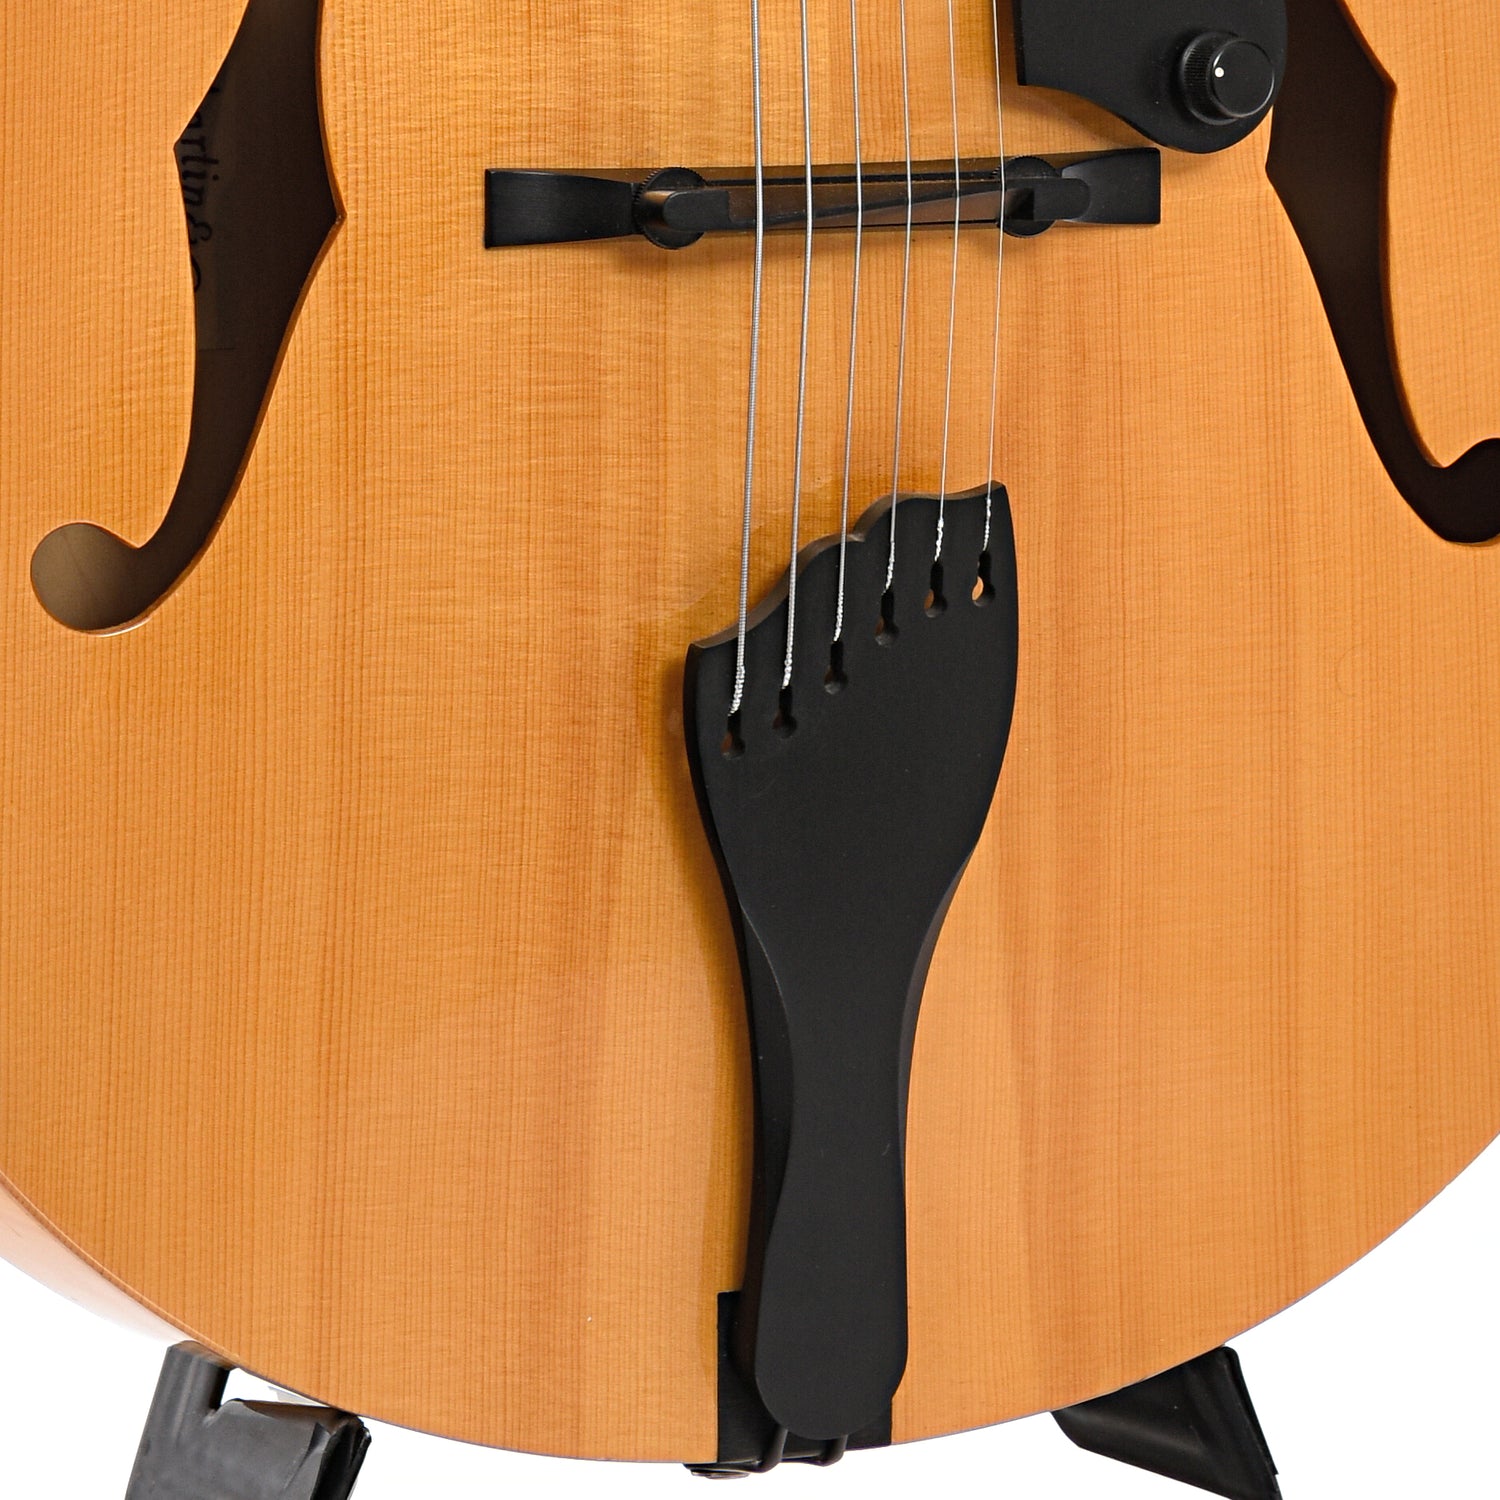 Tailpiece and bridge of Martin CF-1 Archtop